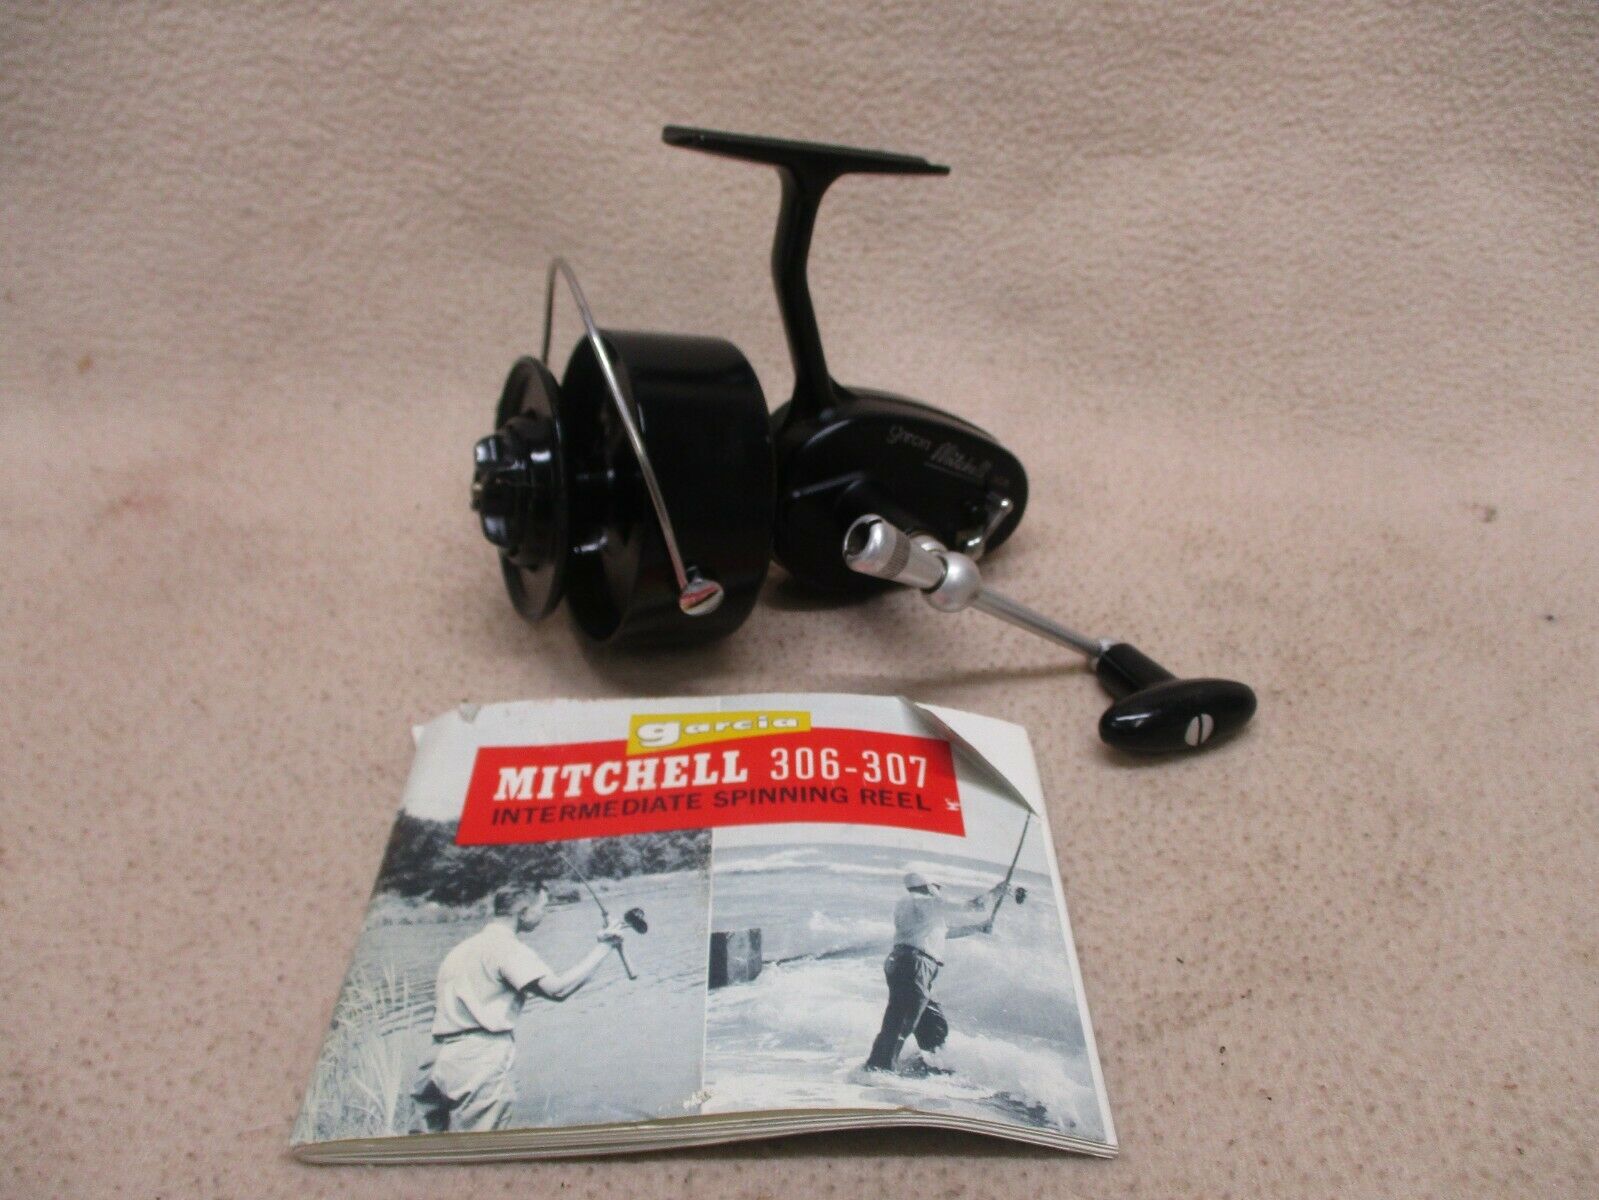 Vintage Garcia Mitchell 306 Fishing Spinning Reel In Excellent Cond With Manual